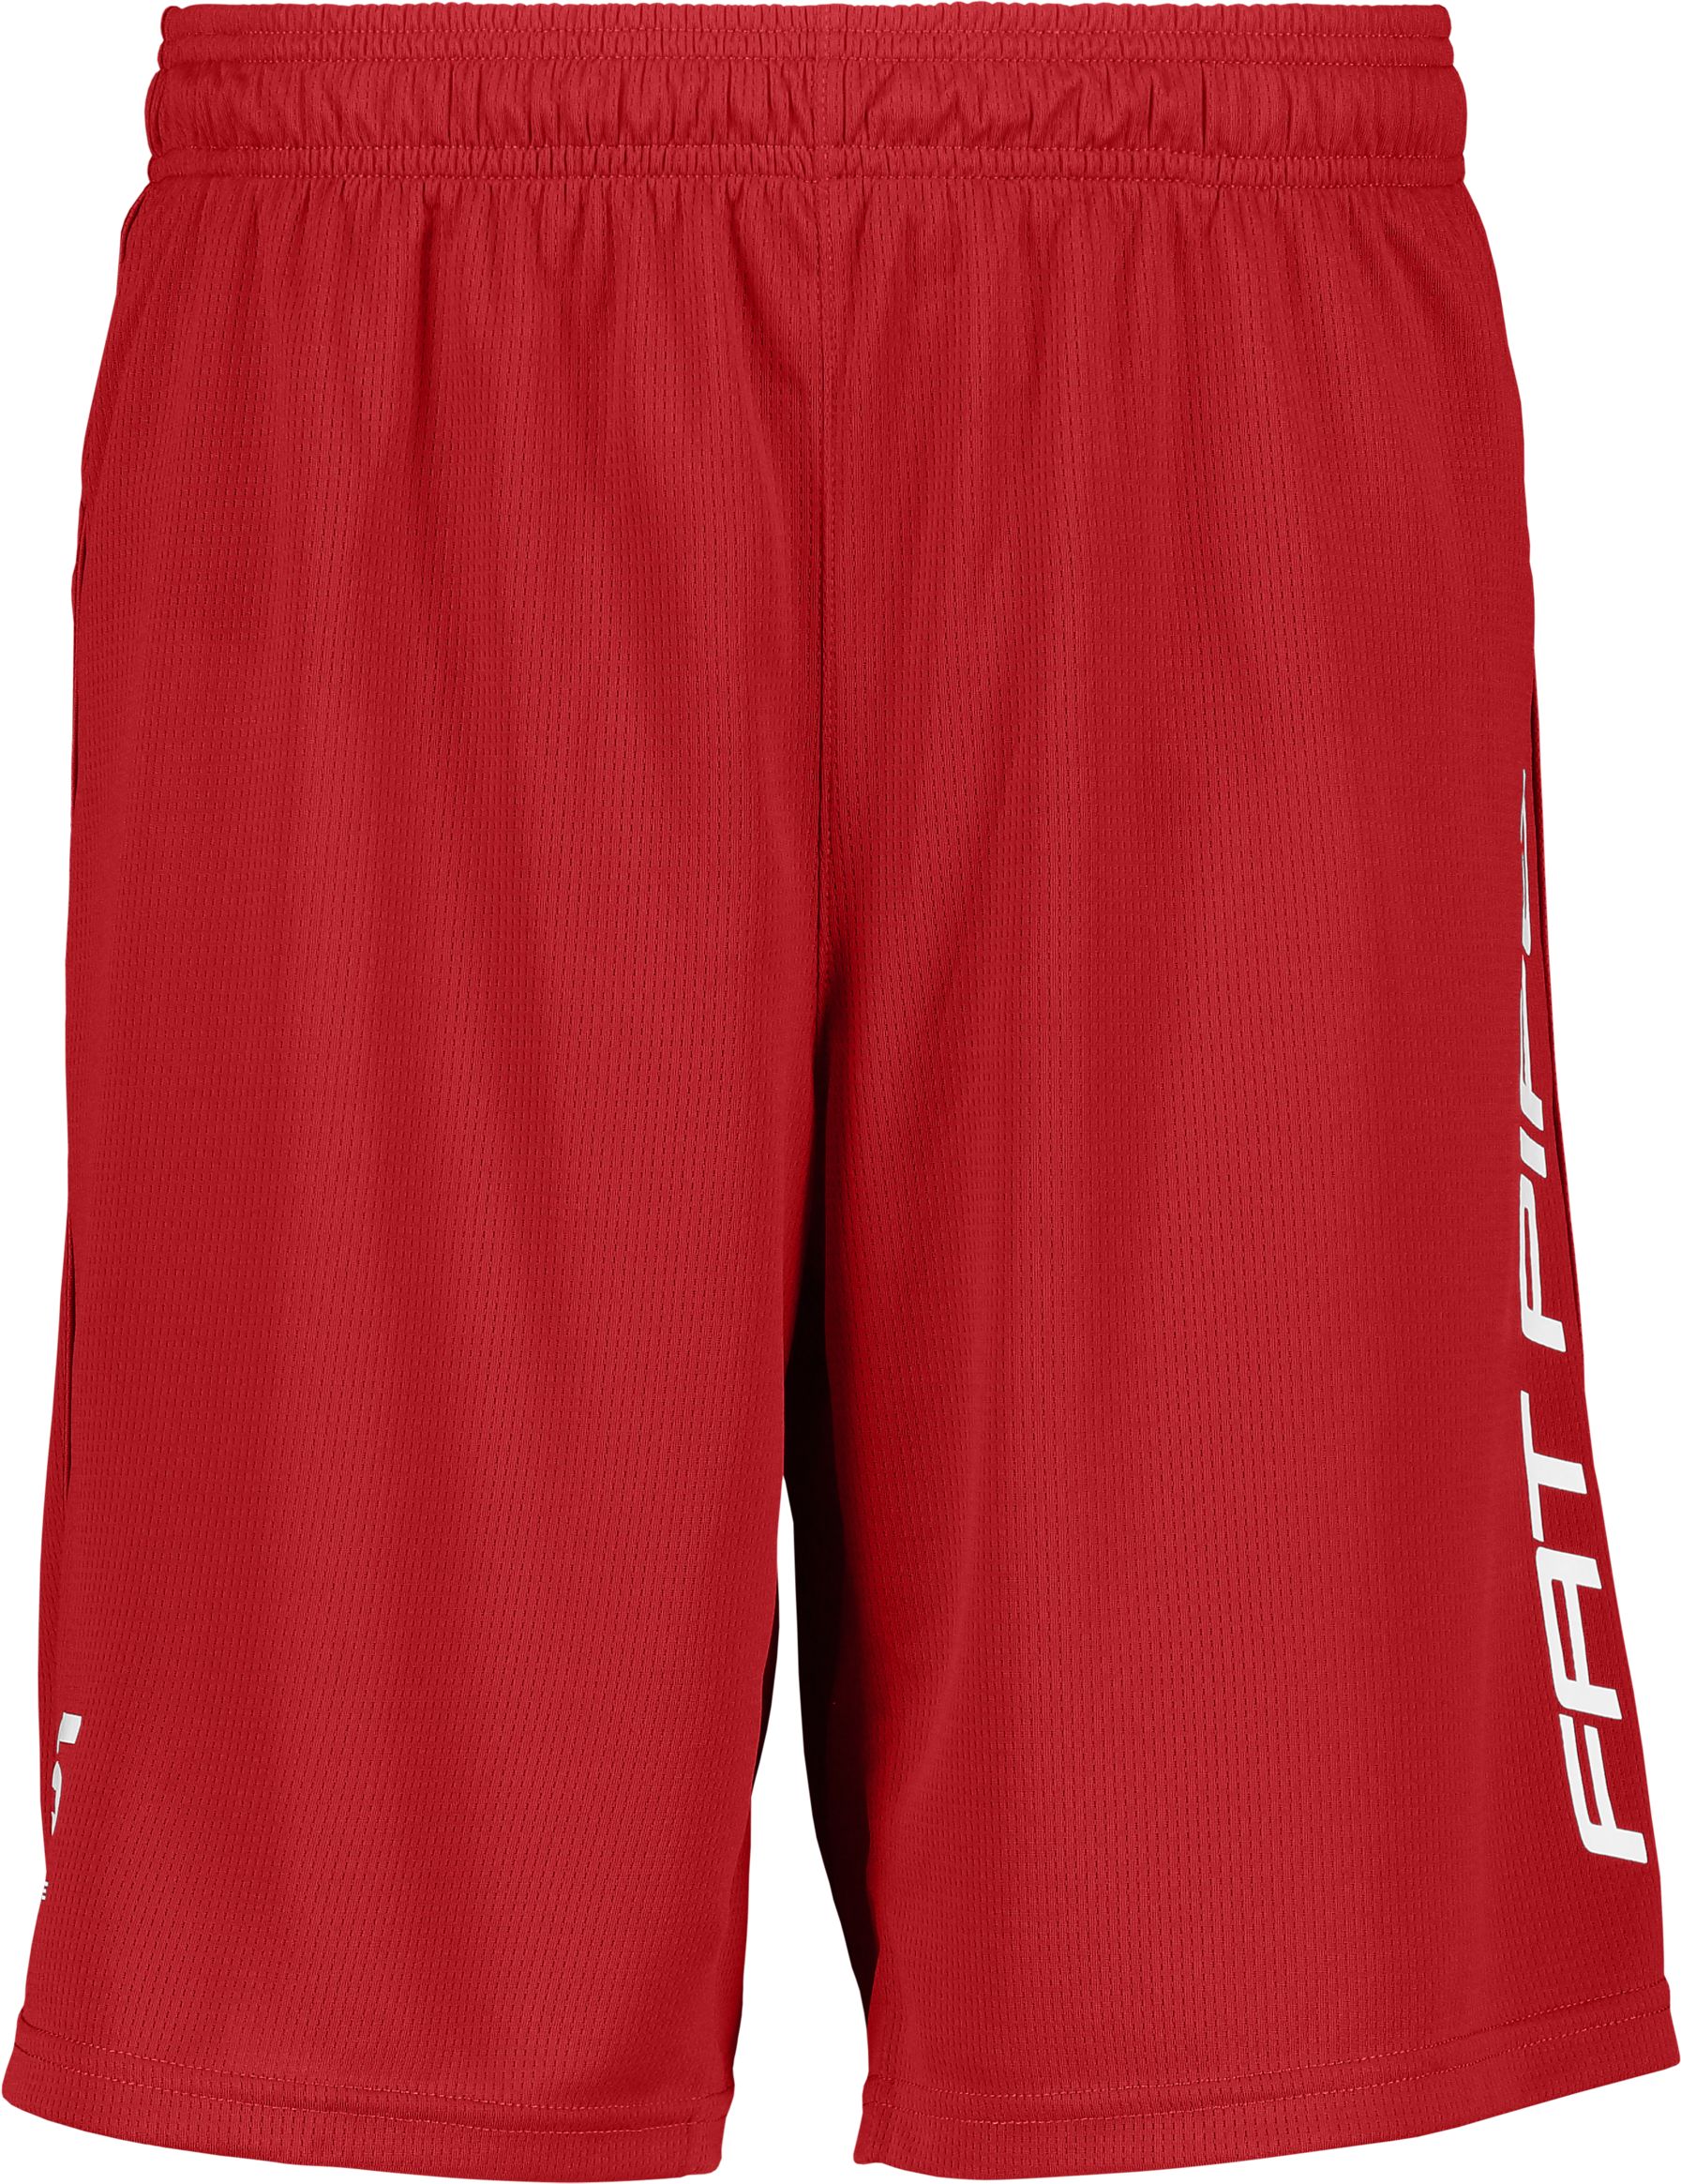 FATPIPE, GEIR PL SHORTS